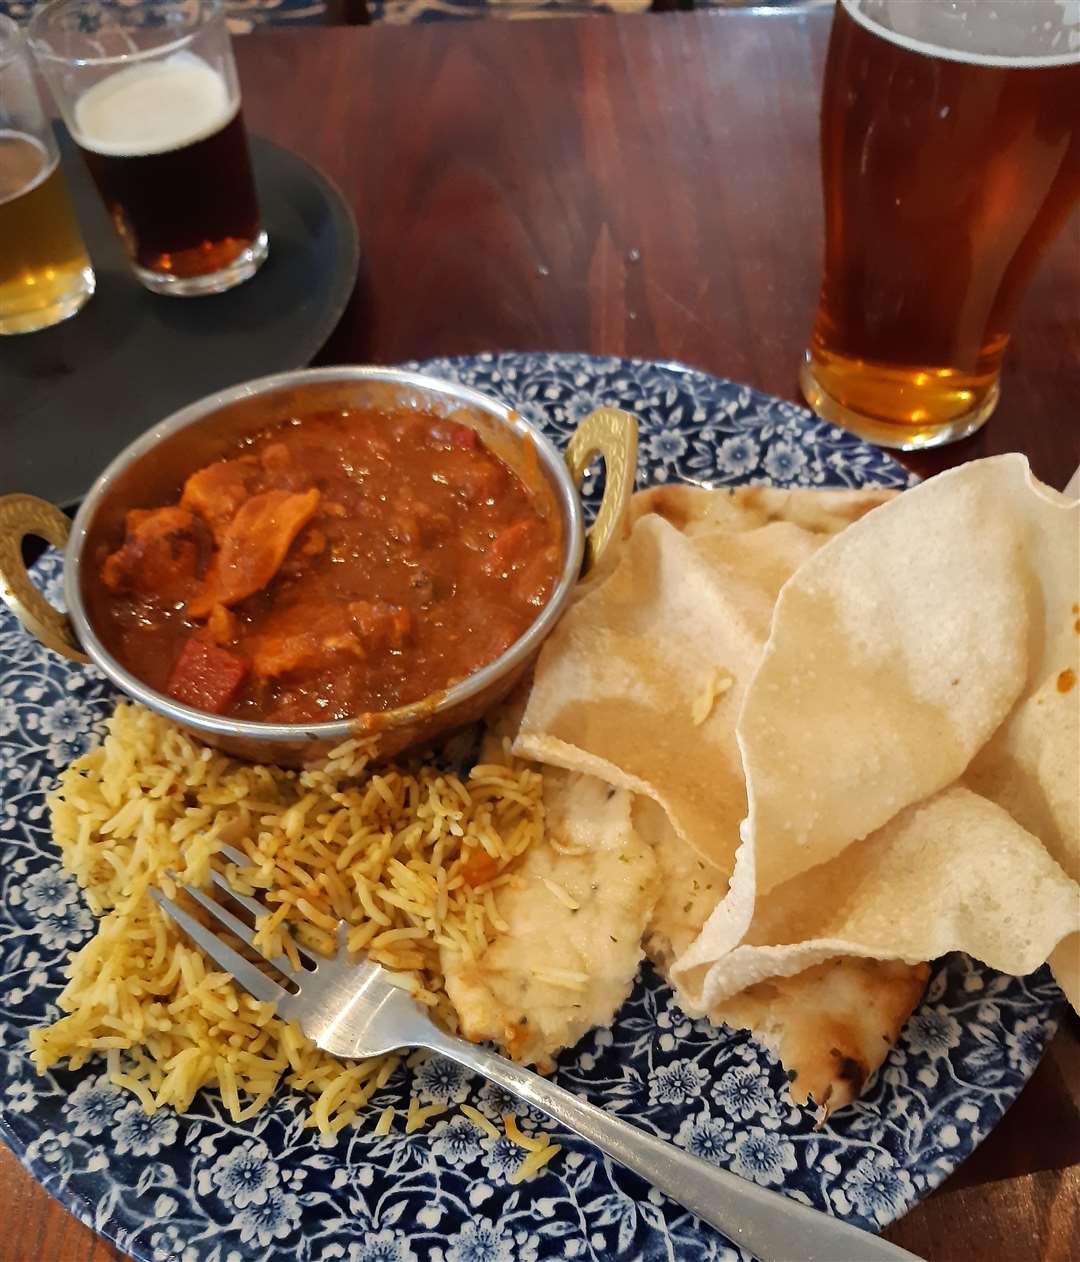 The chicken Jalfrezi curry at Dartford Wetherspoons was rapidly served and included a generous serving of naan bread. Photo: Sean Delaney